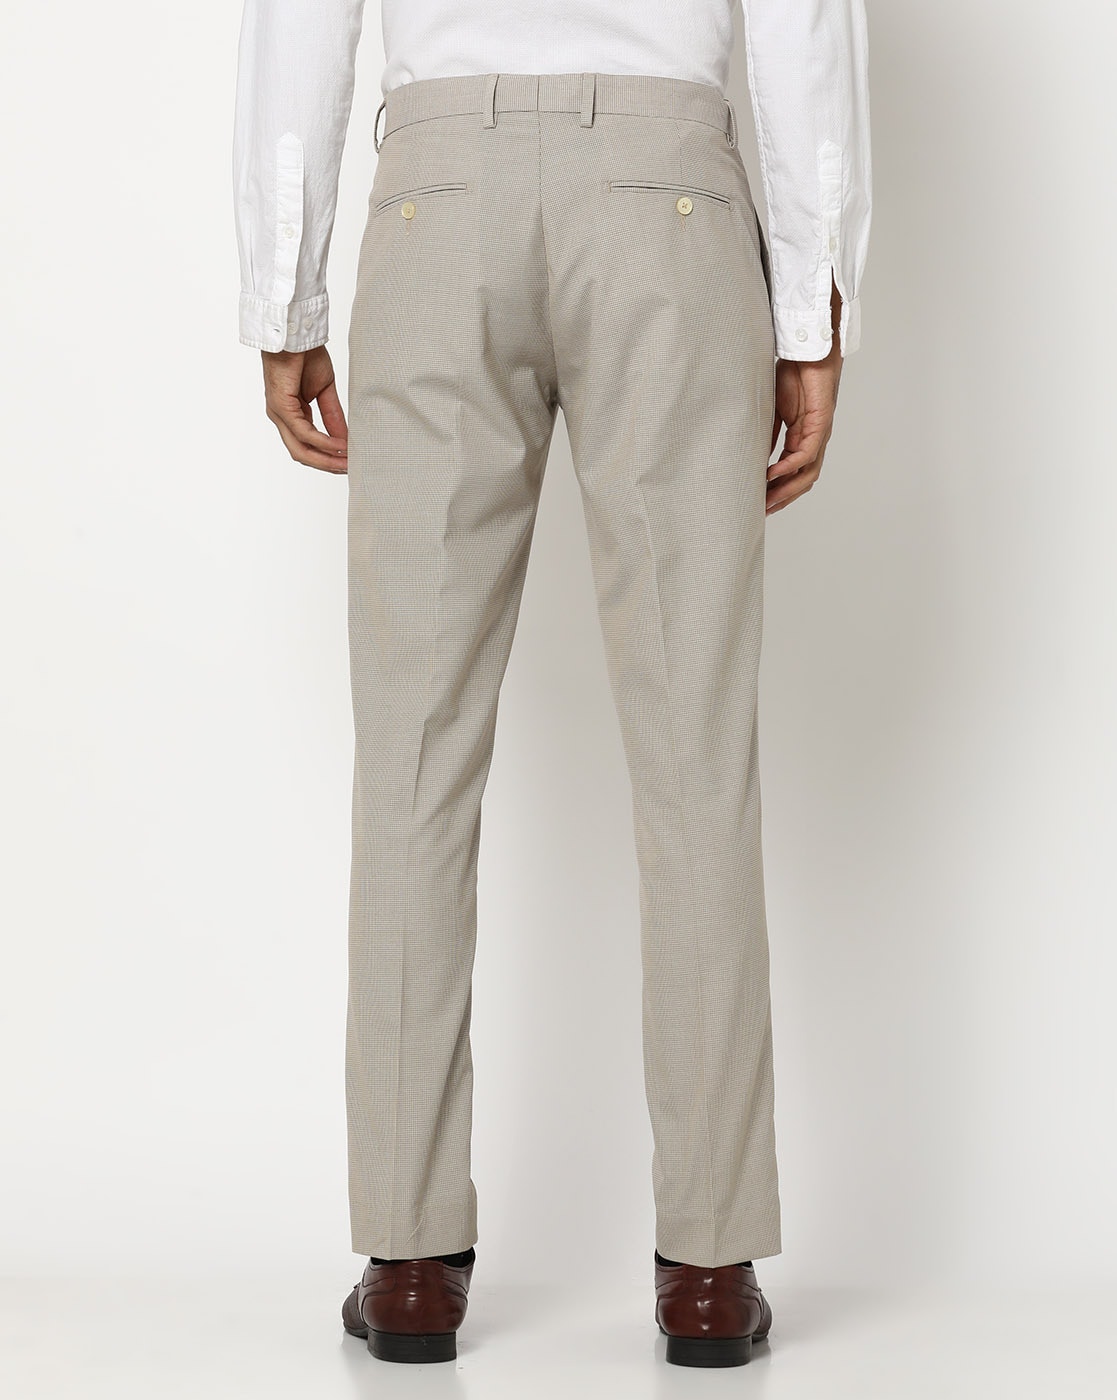 Buy Skinny Fit Flat-Front Trousers Online at Best Prices in India - JioMart.